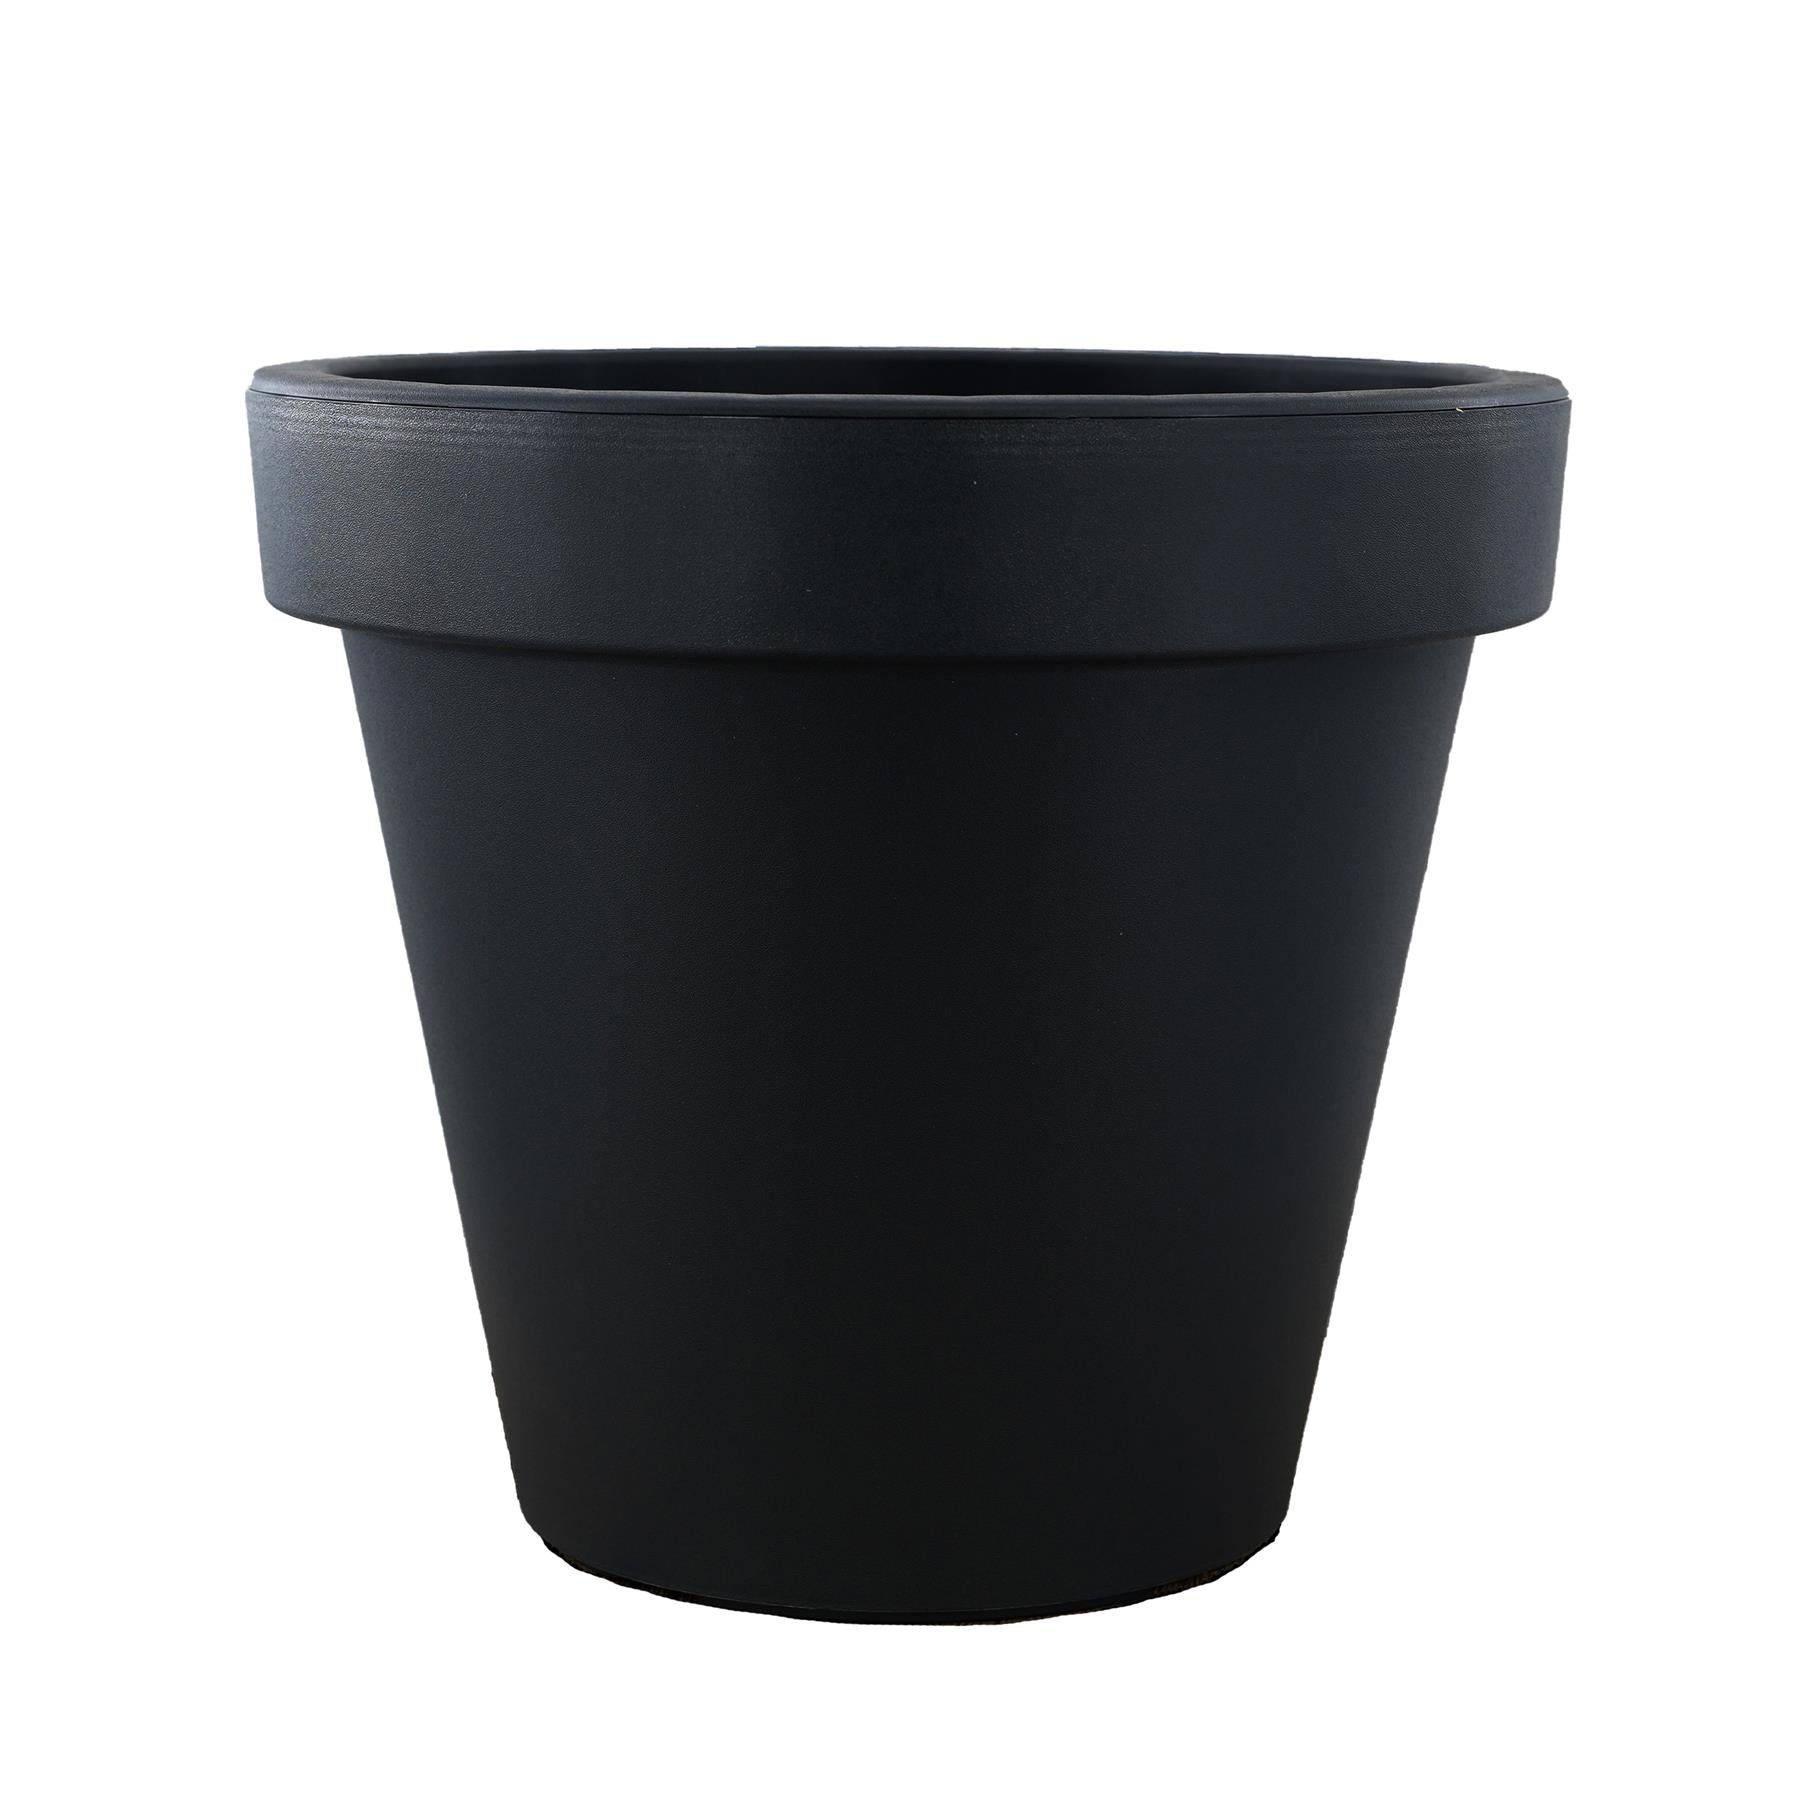 Anthracite Large Flower Pot Planter 35 x 31 cm by Geezy - The Magic Toy Shop